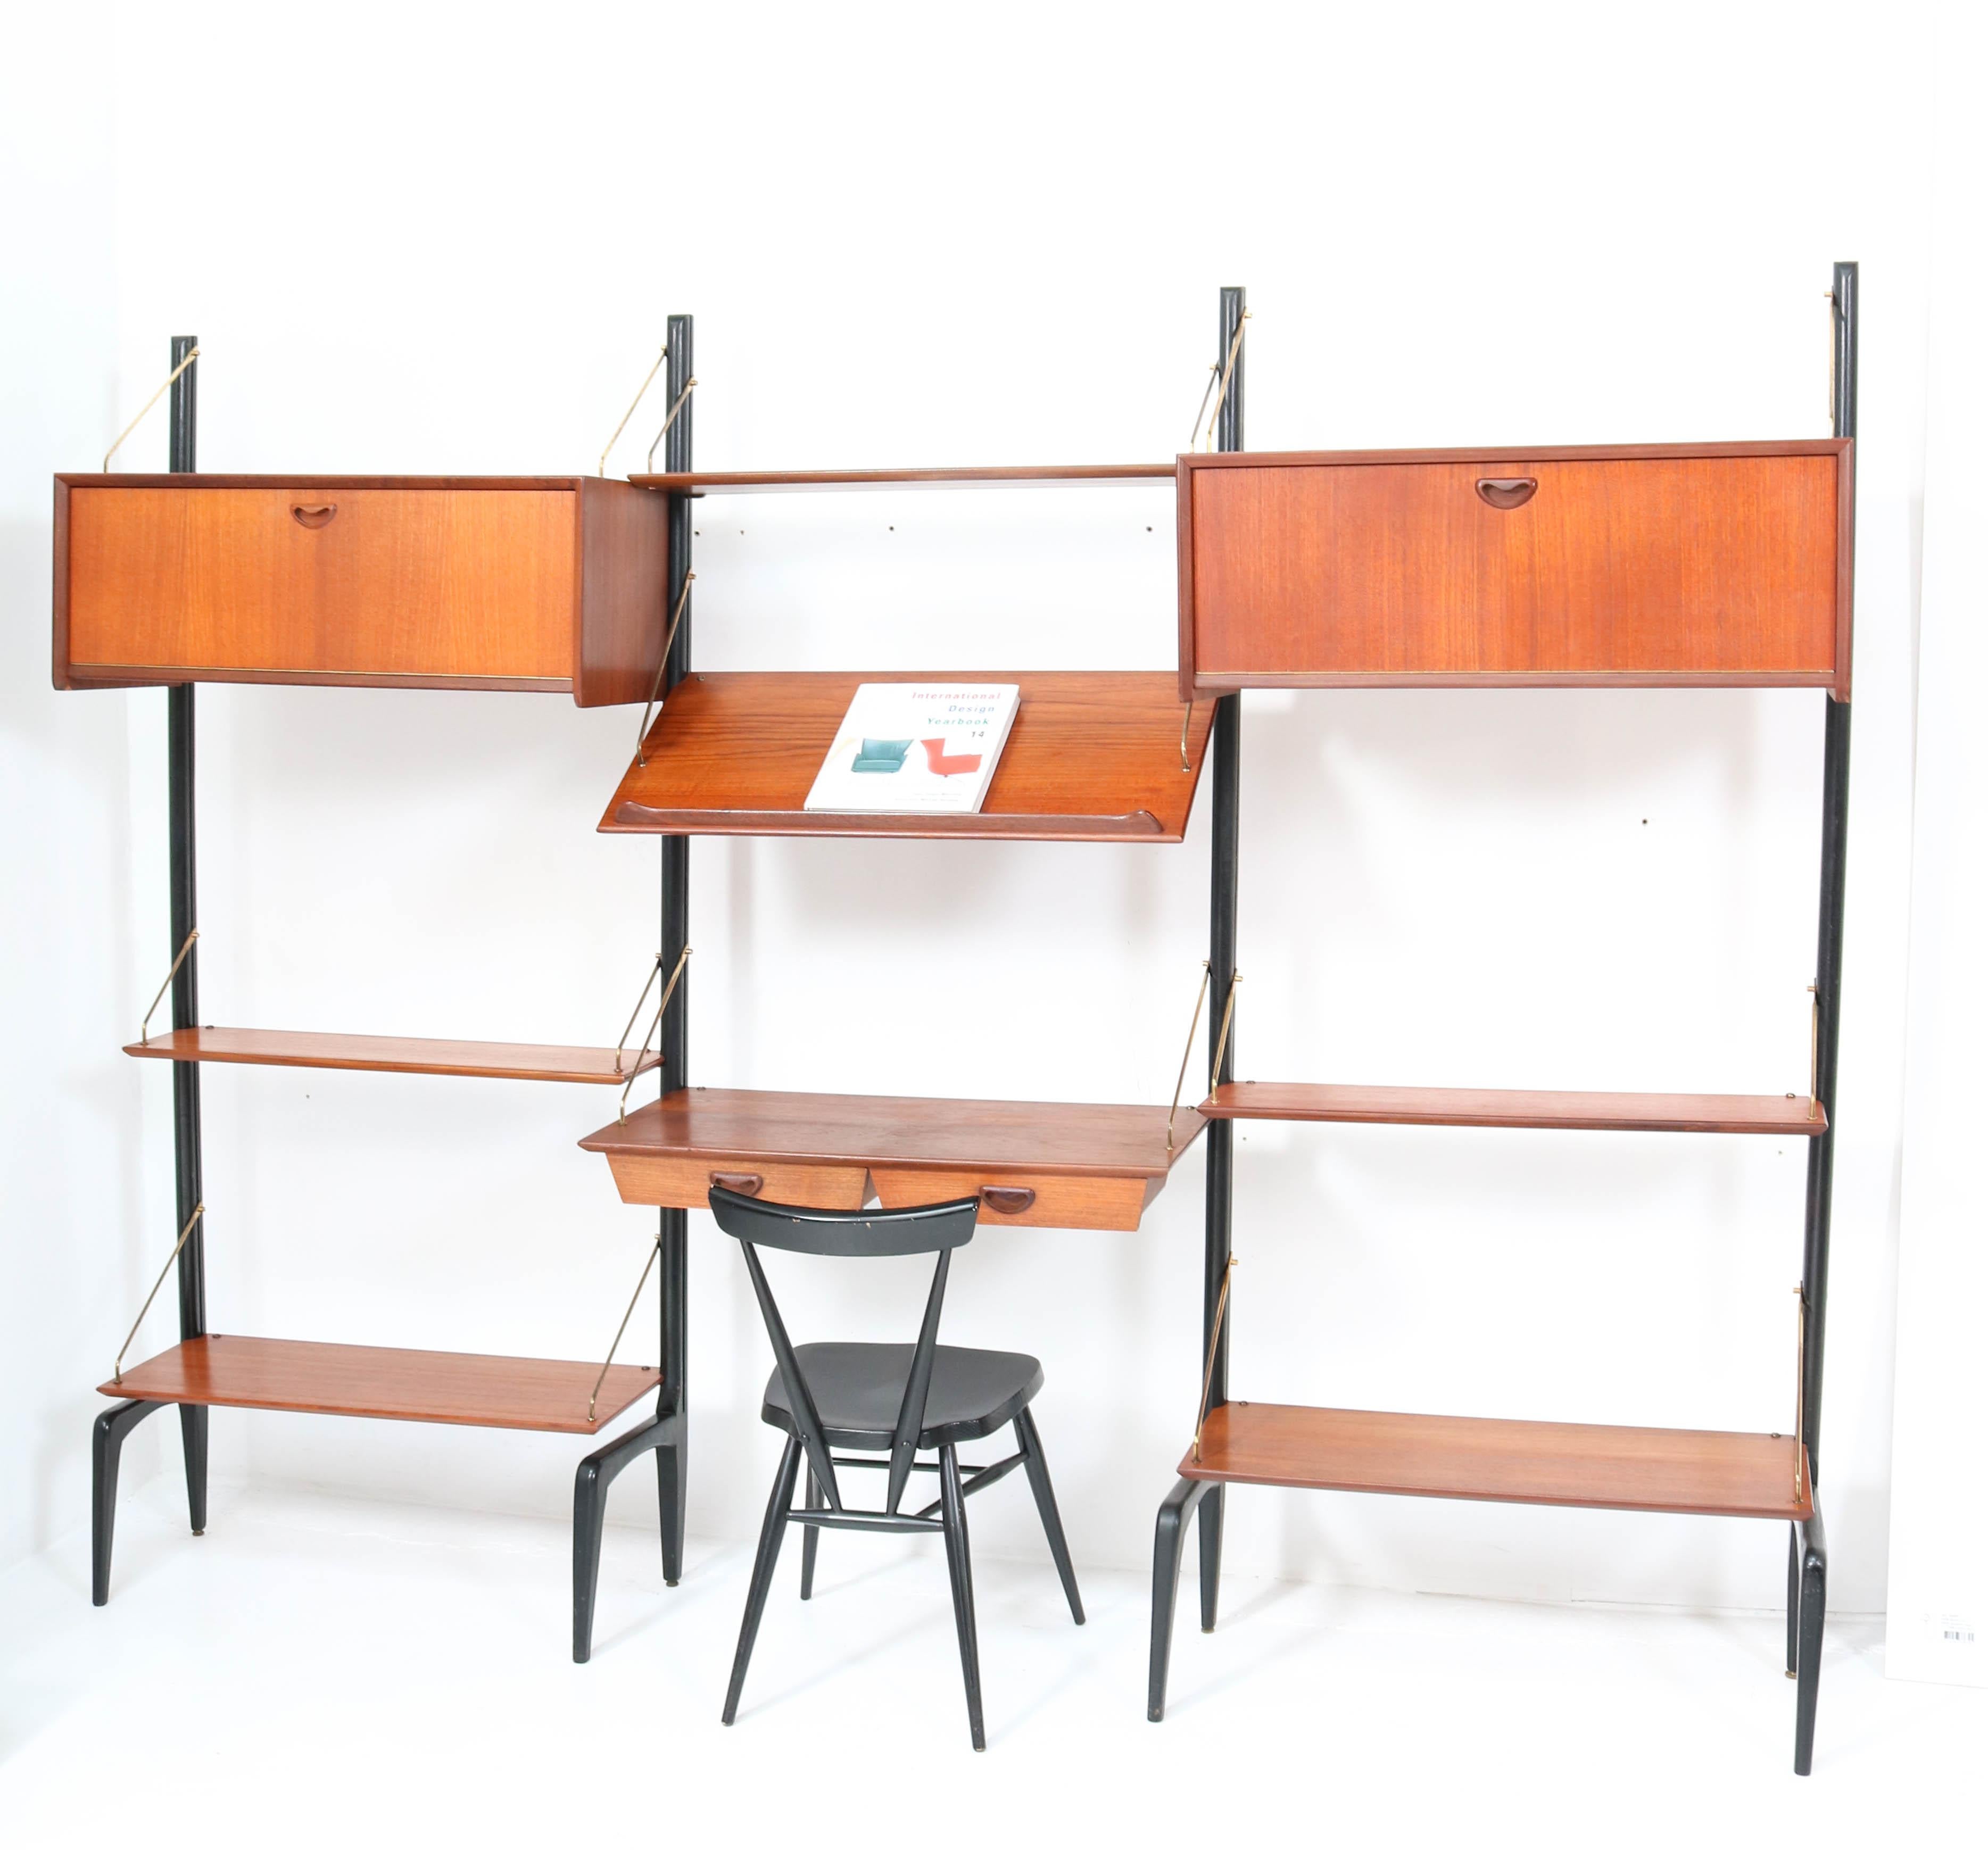 Magnificent and rare Mid-Century Modern free standing modular wall unit.
Design by Louis van Teeffelen for WéBé.
Striking Dutch design from the 1950s.
Rare because of the fact that this configuration has the magazine or book shelf which is